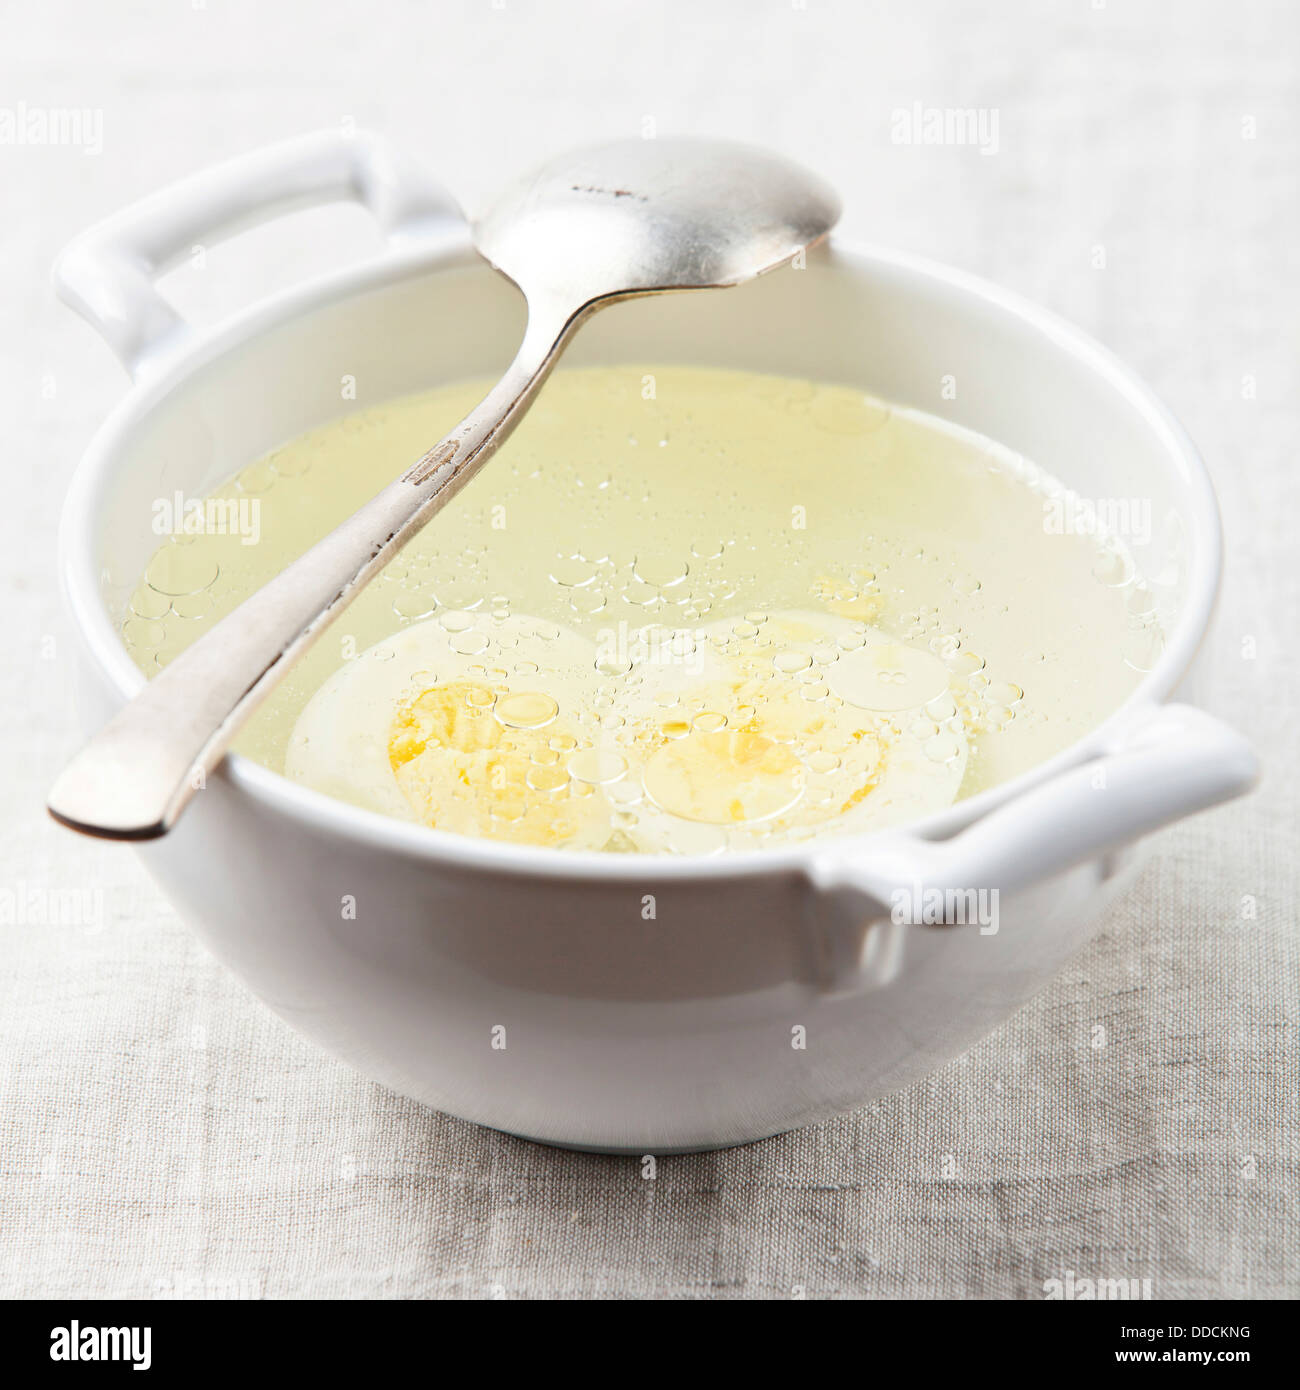 Served place setting with chicken broth Stock Photo